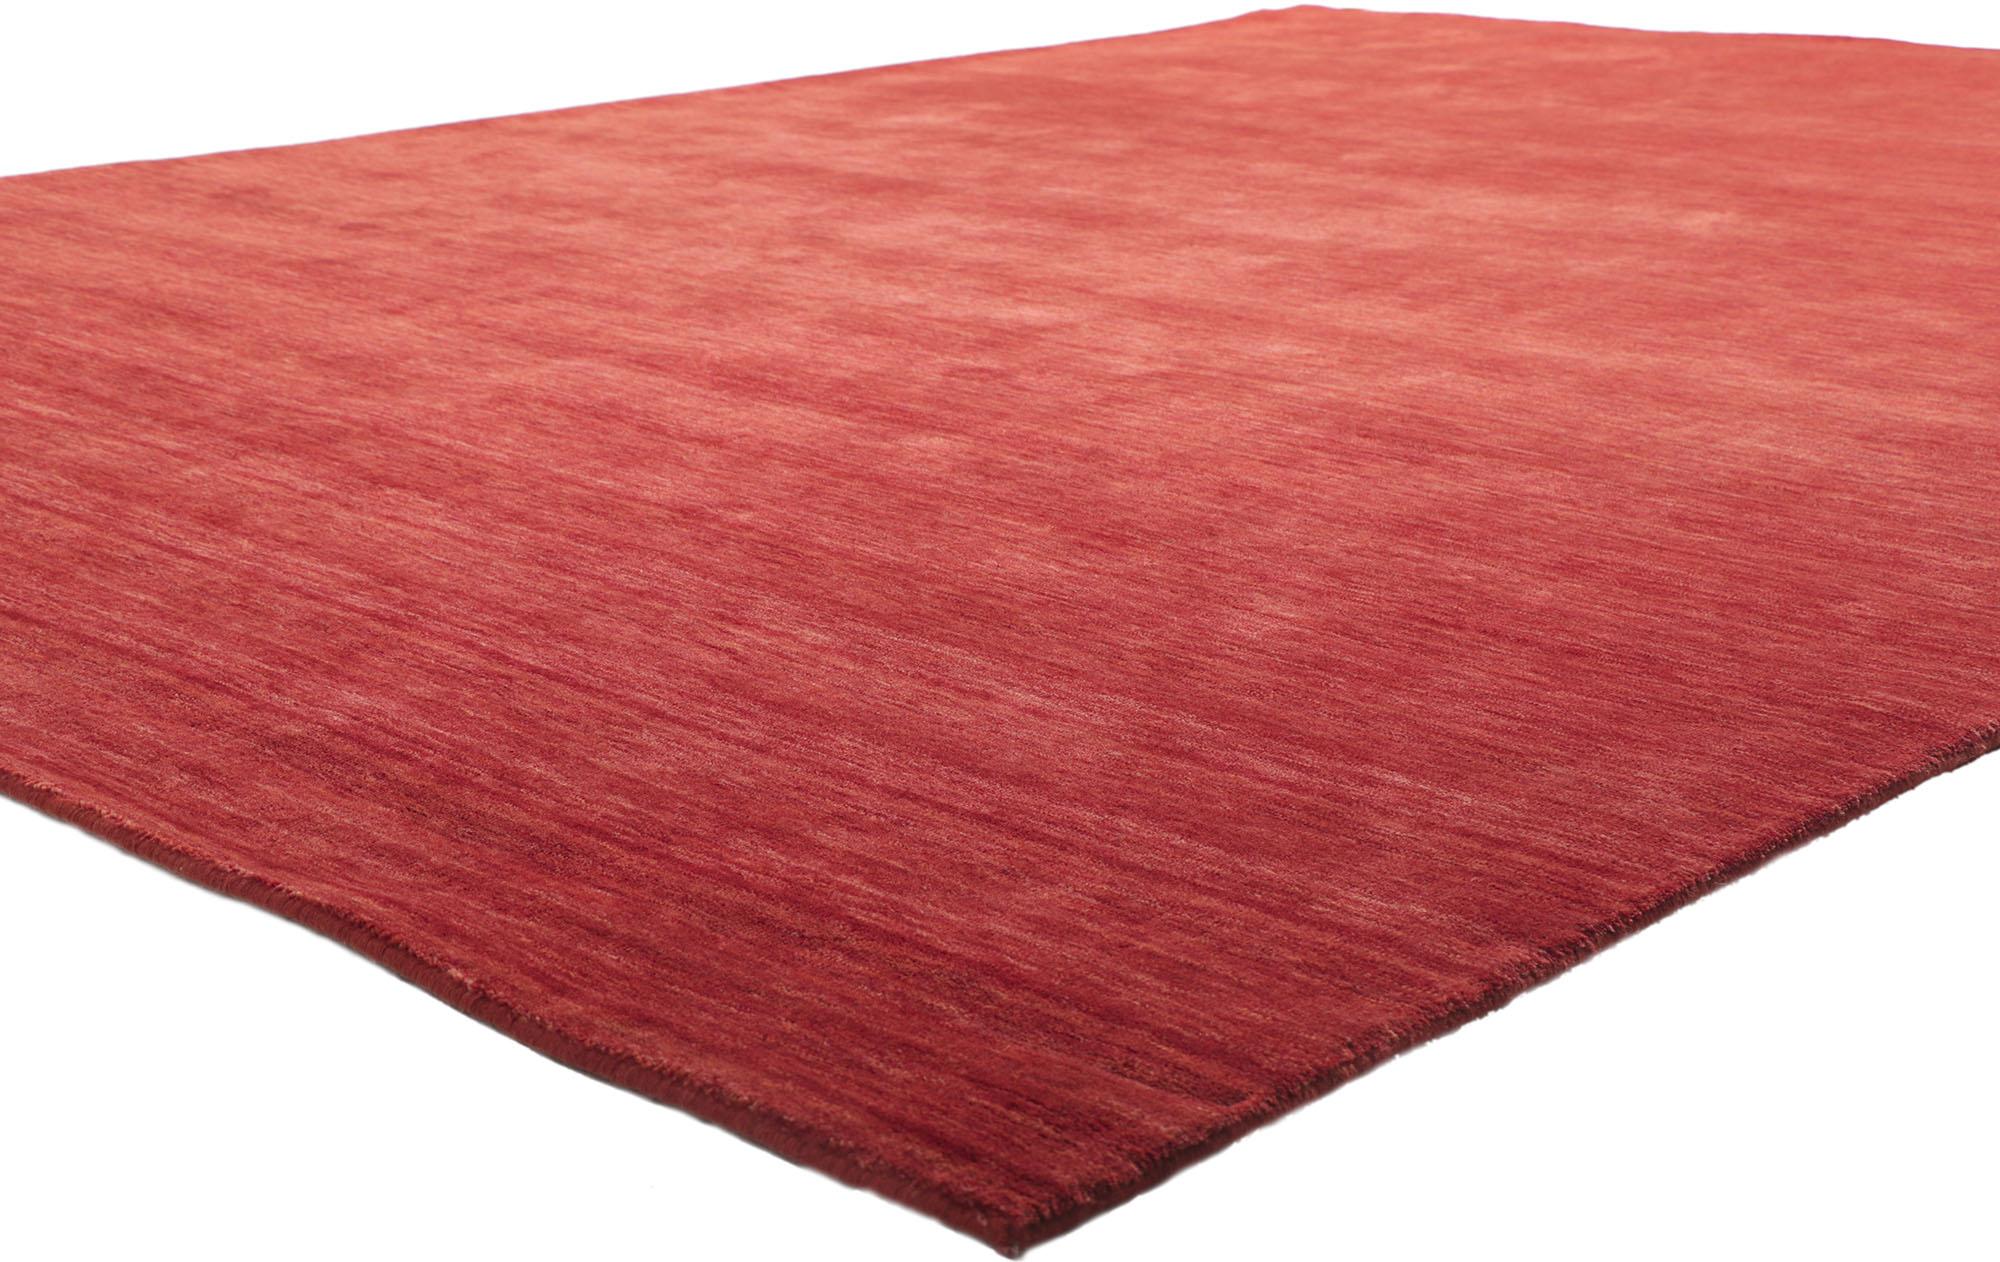 30732 New Contemporary Red Area rug with Modern Style 08'11 x 11'10. Effortless, elegant, and casual meets the eye in this contemporary Indian area rug. It features gorgeous red hues and softly gradated striations running selvage to selvage blending